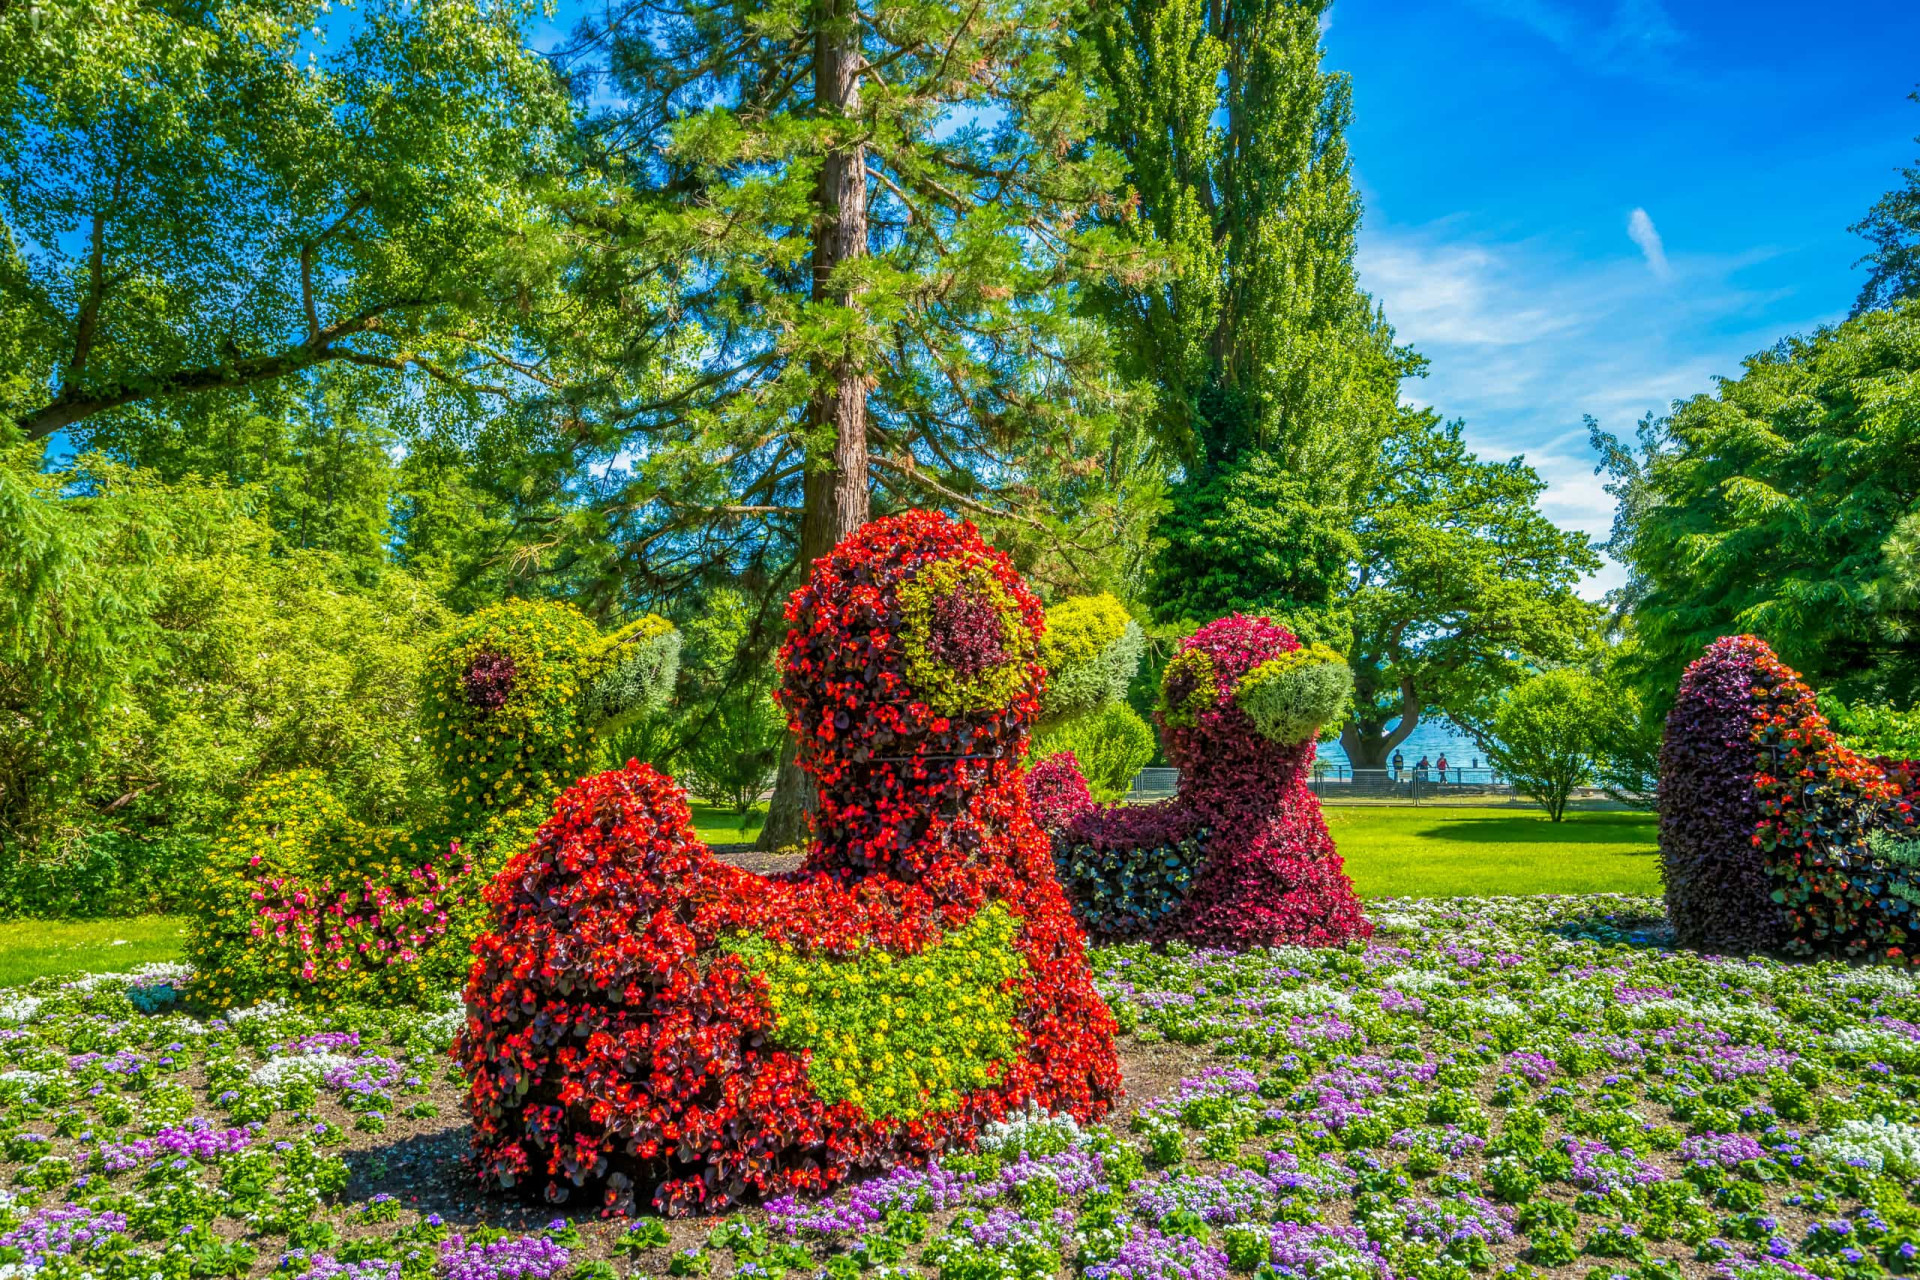 <p>Mainau is a island in Lake Constance and referred to as the Blumeninsel, or flower island. From March to May, you can see several types of flowers in full and colorful bloom, including tulips, daffodils, and hyacinths. The bouquet is intoxicating, and attracts thousand of butterflies.</p><p>Sources: (@GermanyinUSA) (History Daily) (UNESCO) (The Vintage News)</p><p>See also: <a href="https://www.starsinsider.com/travel/215764/discover-the-best-destinations-for-flower-lovers">Discover the best destinations for flower lovers</a></p>